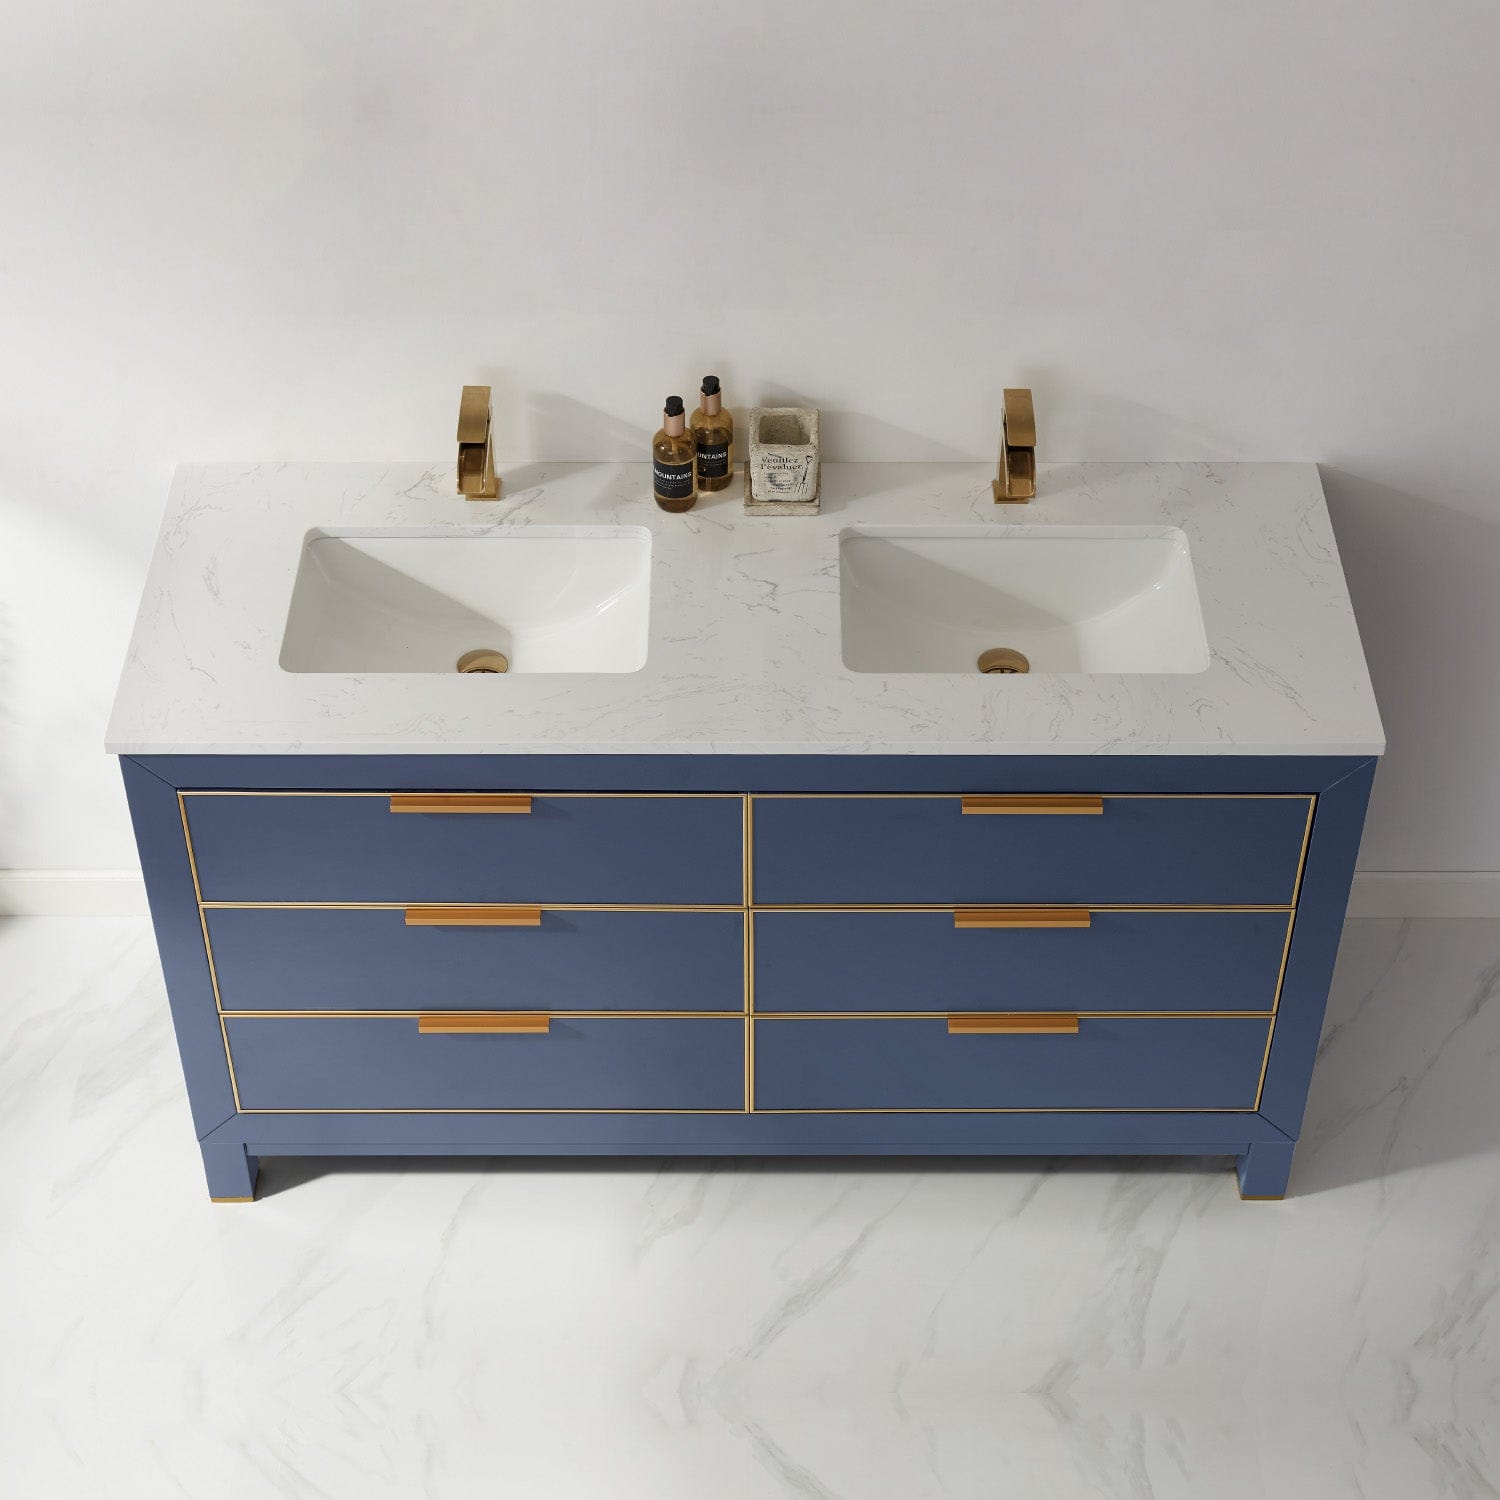 Altair Jackson 60" Double Bathroom Vanity Set in Royal Blue and Composite Carrara White Stone Countertop without Mirror 533060-RB-AW-NM - Molaix631112971669Vanity533060-RB-AW-NM